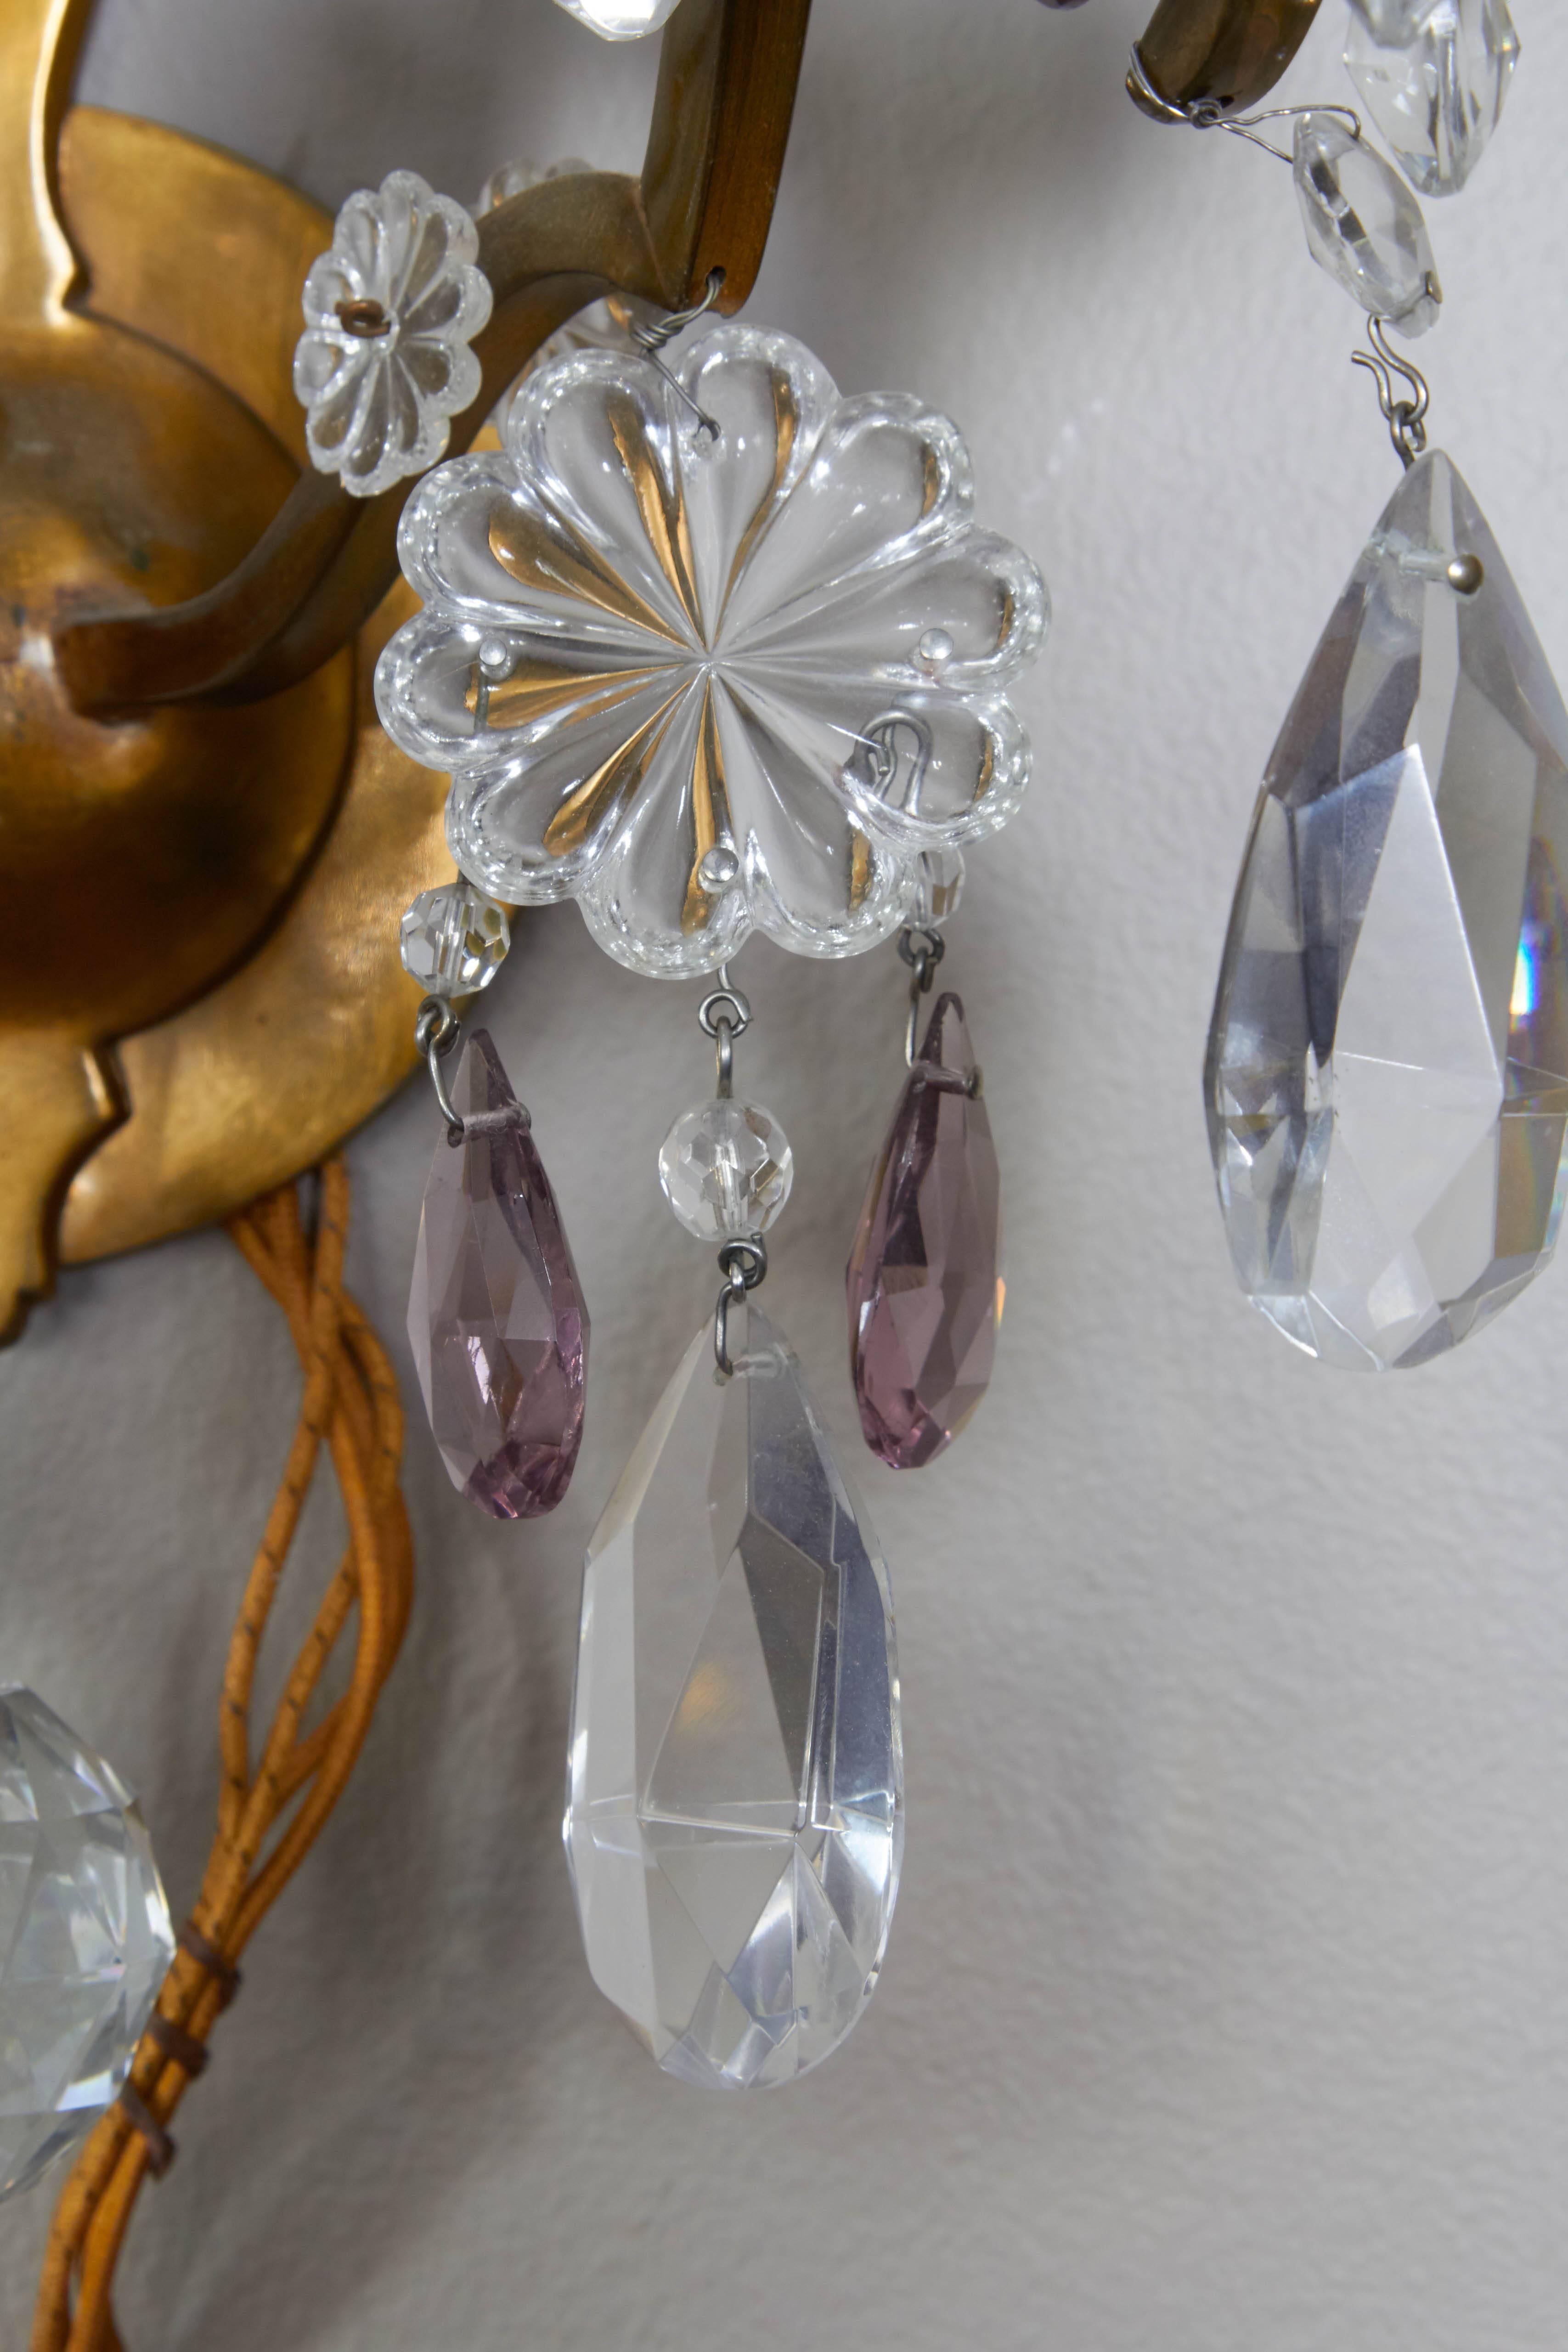 20th Century Neoclassical Style Metal Sconces with Crystal Florets